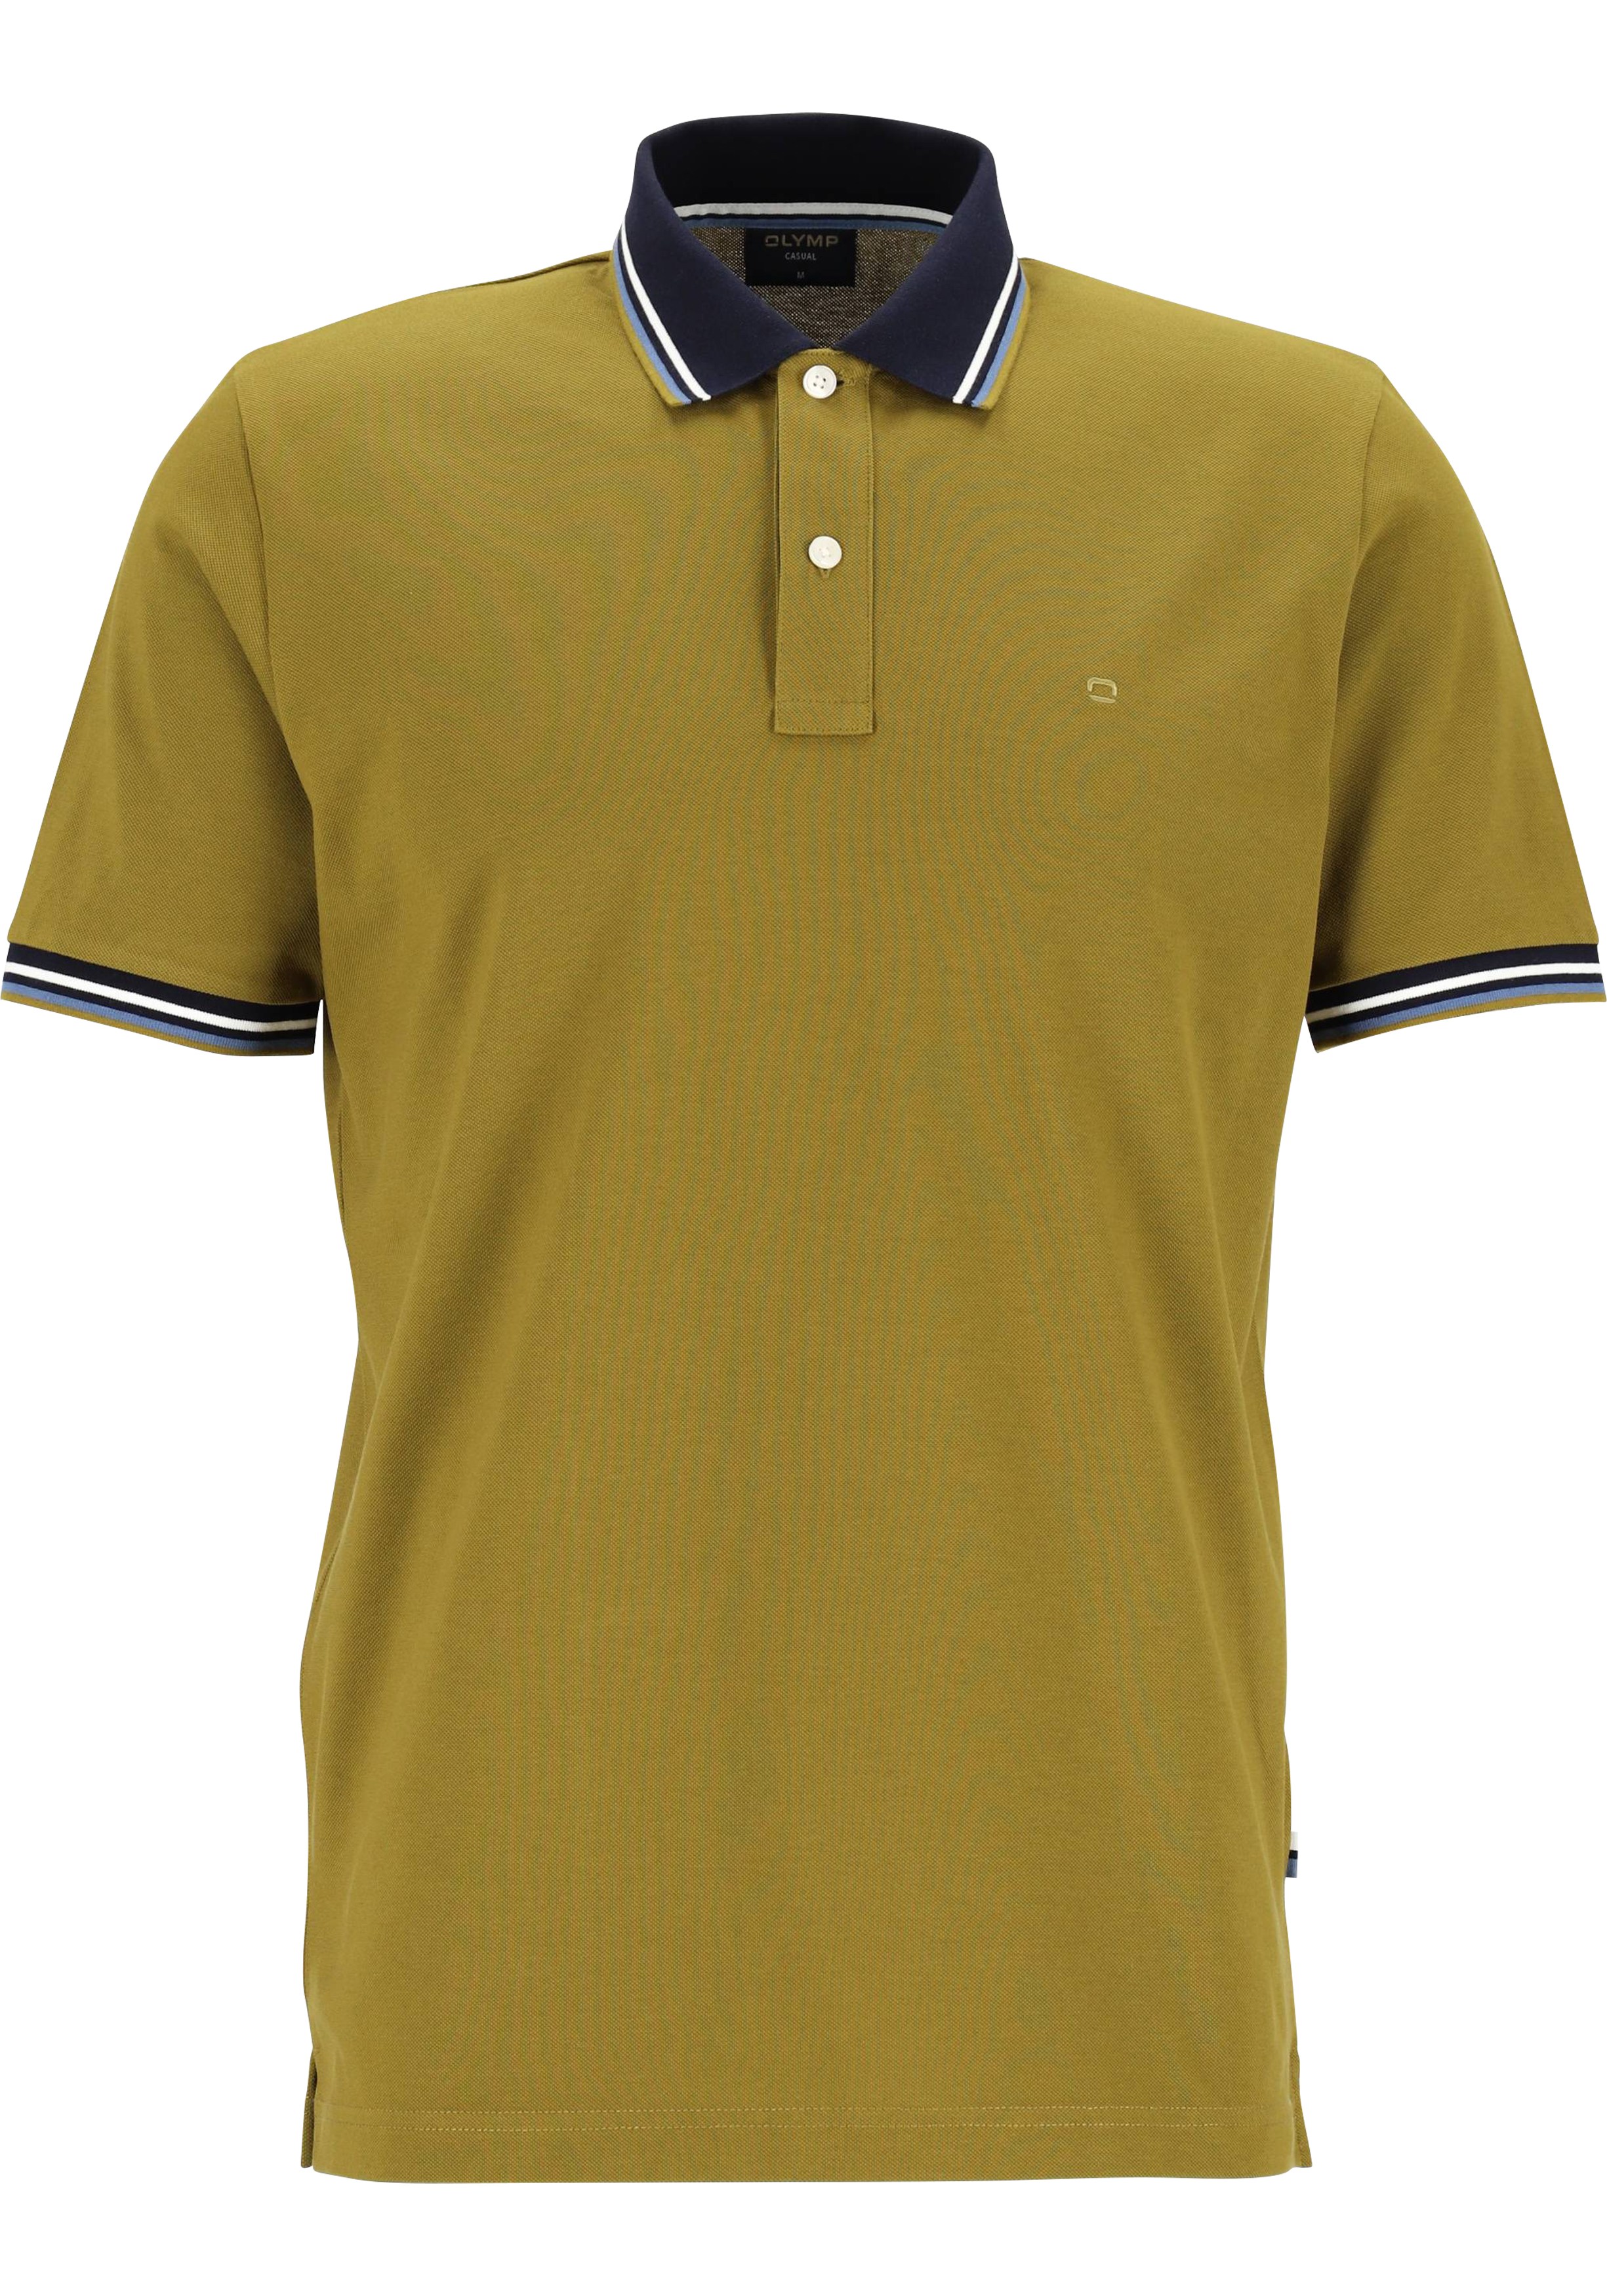 OLYMP Polo Casual, modern fit polo, olijfgroen